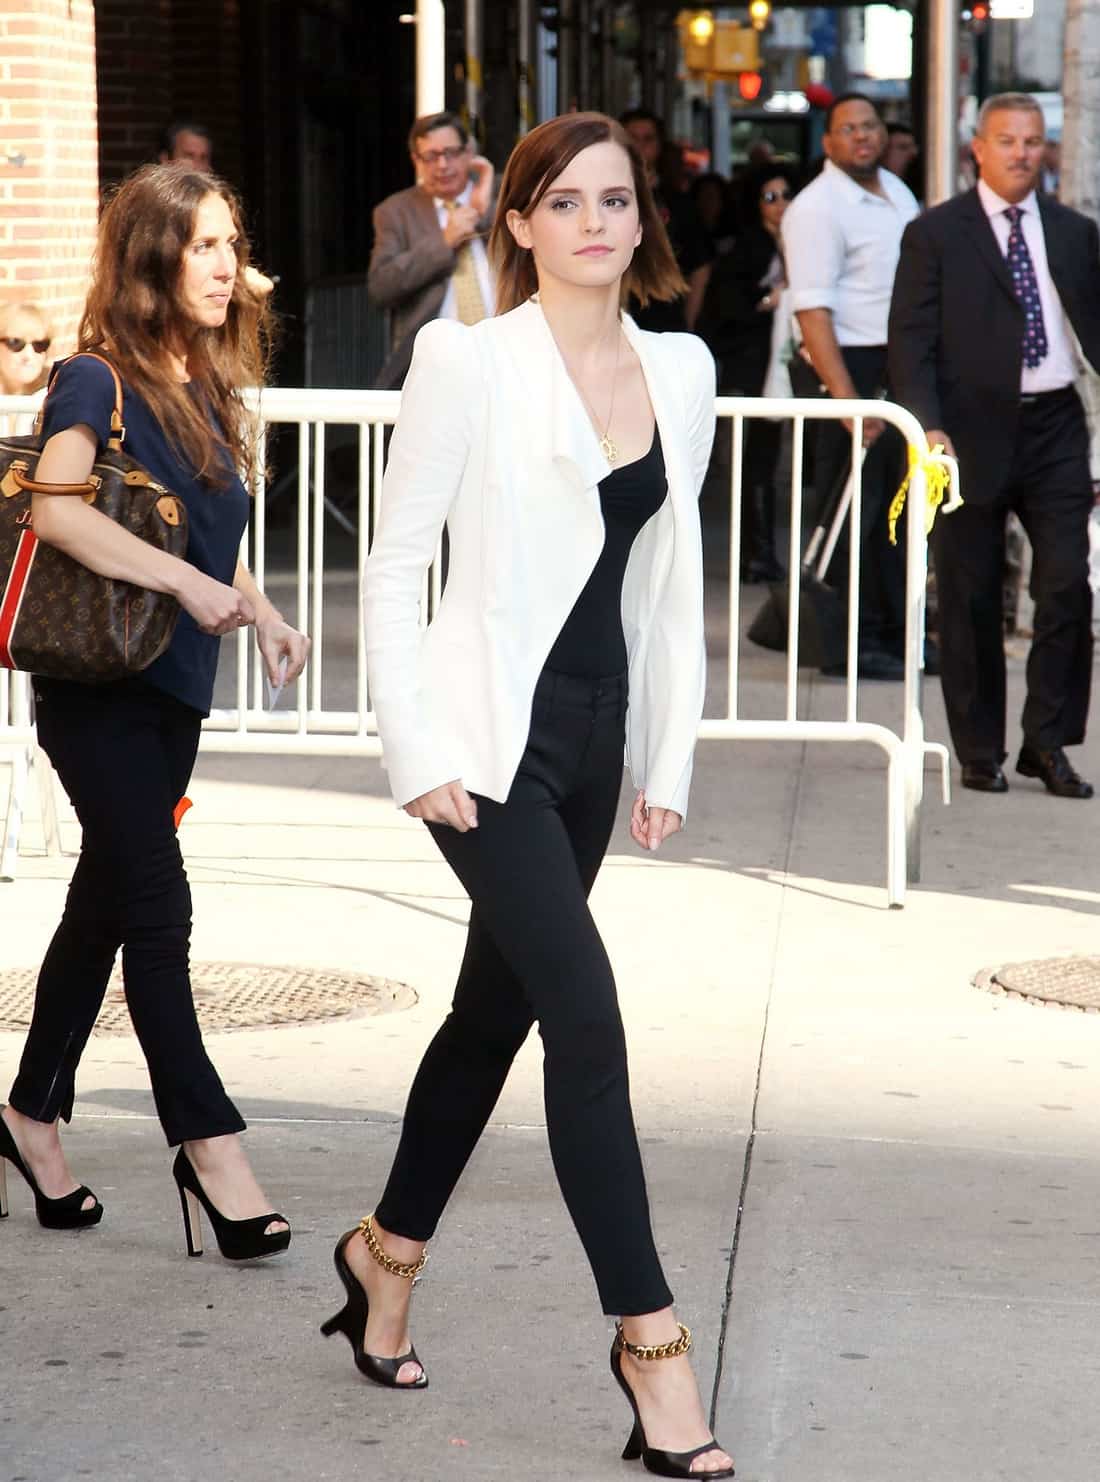 Emma Watson Looking Stylish Ahead of her "The Late Show" Appearance in NY